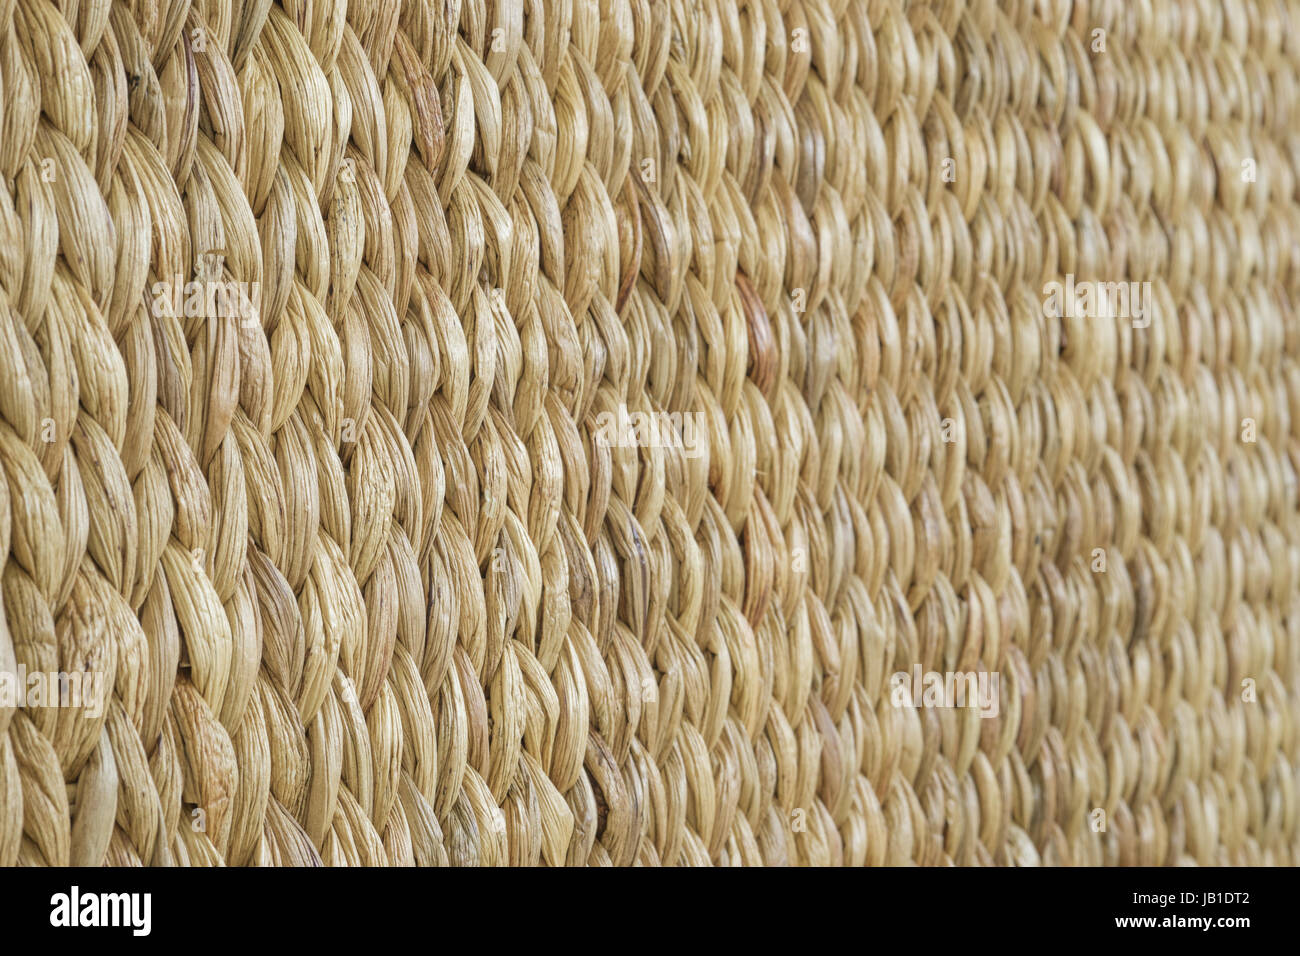 Meshwork of wooden reed wicker texture background. Oblique view Stock Photo